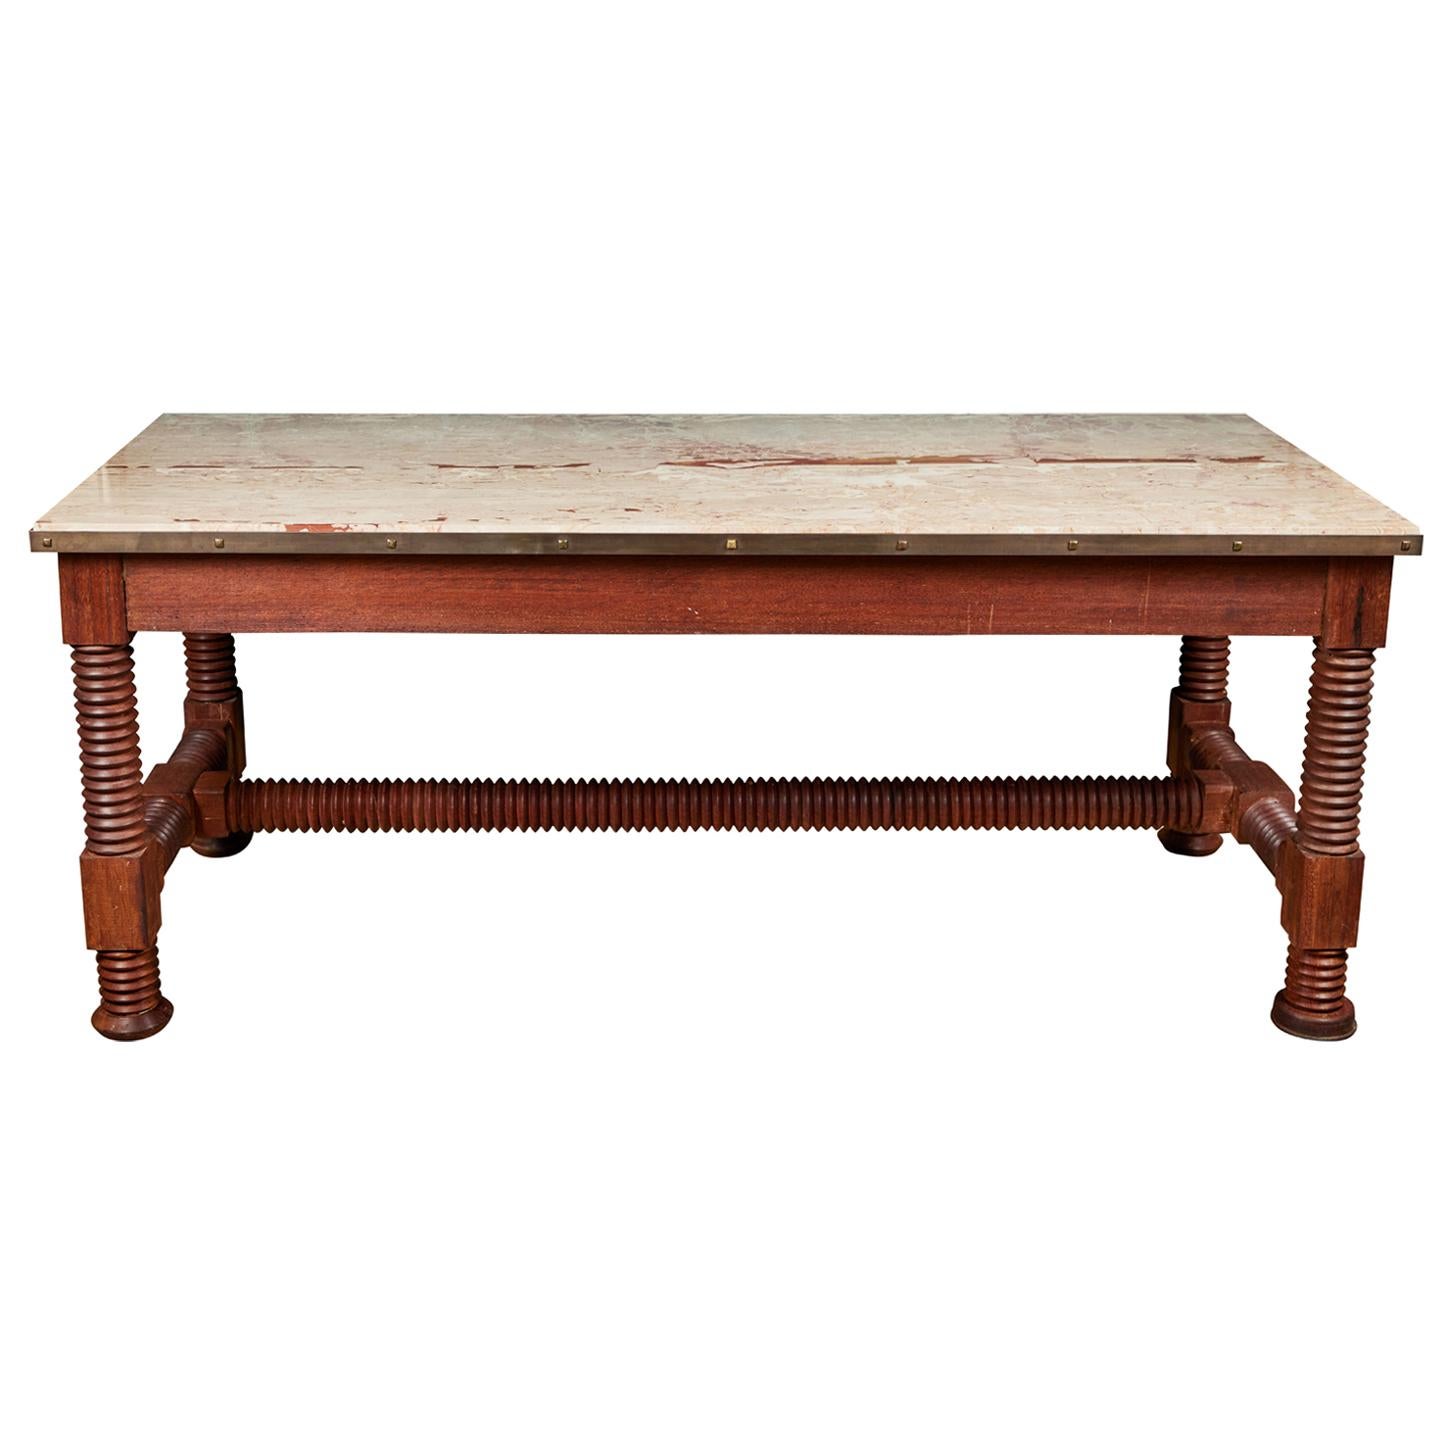 Large Antique Center Table with Original Marble-Top and Spool Turned Legs